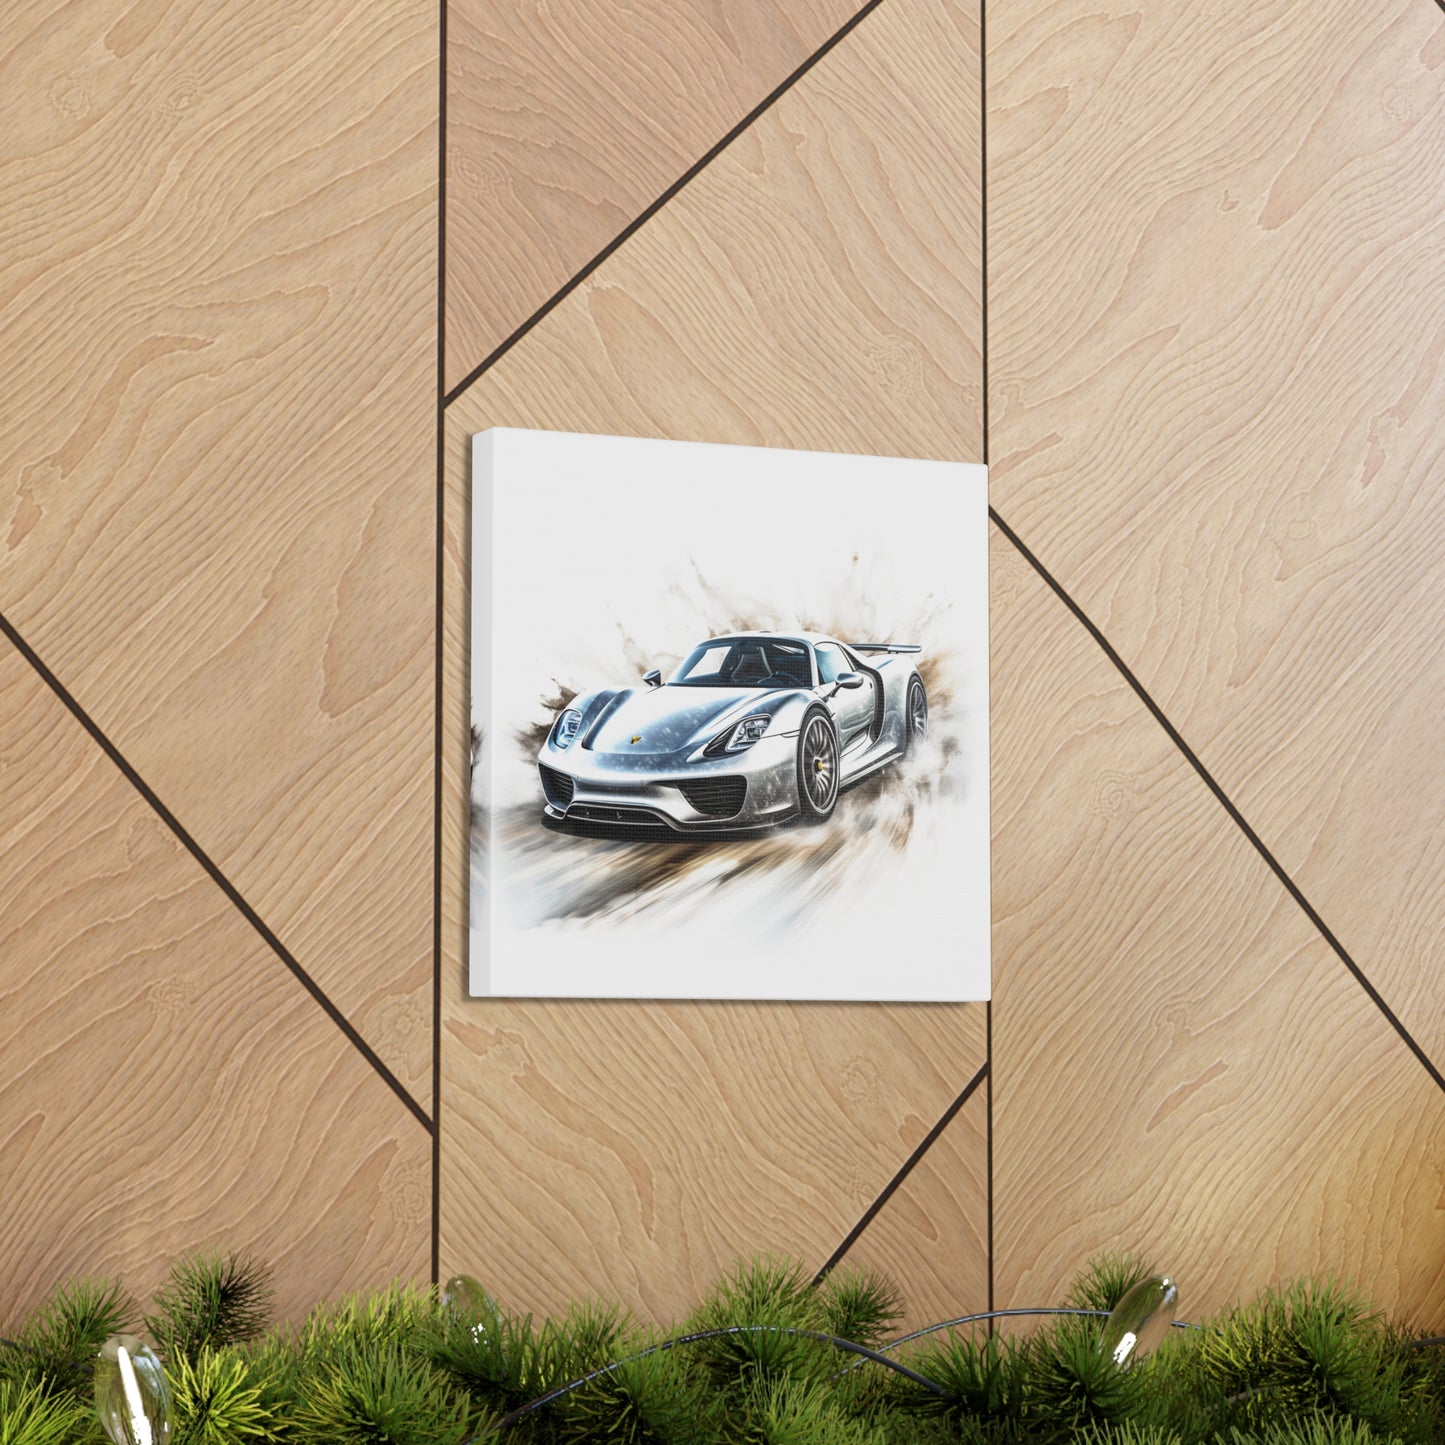 Canvas Gallery Wraps 918 Spyder white background driving fast with water splashing 2